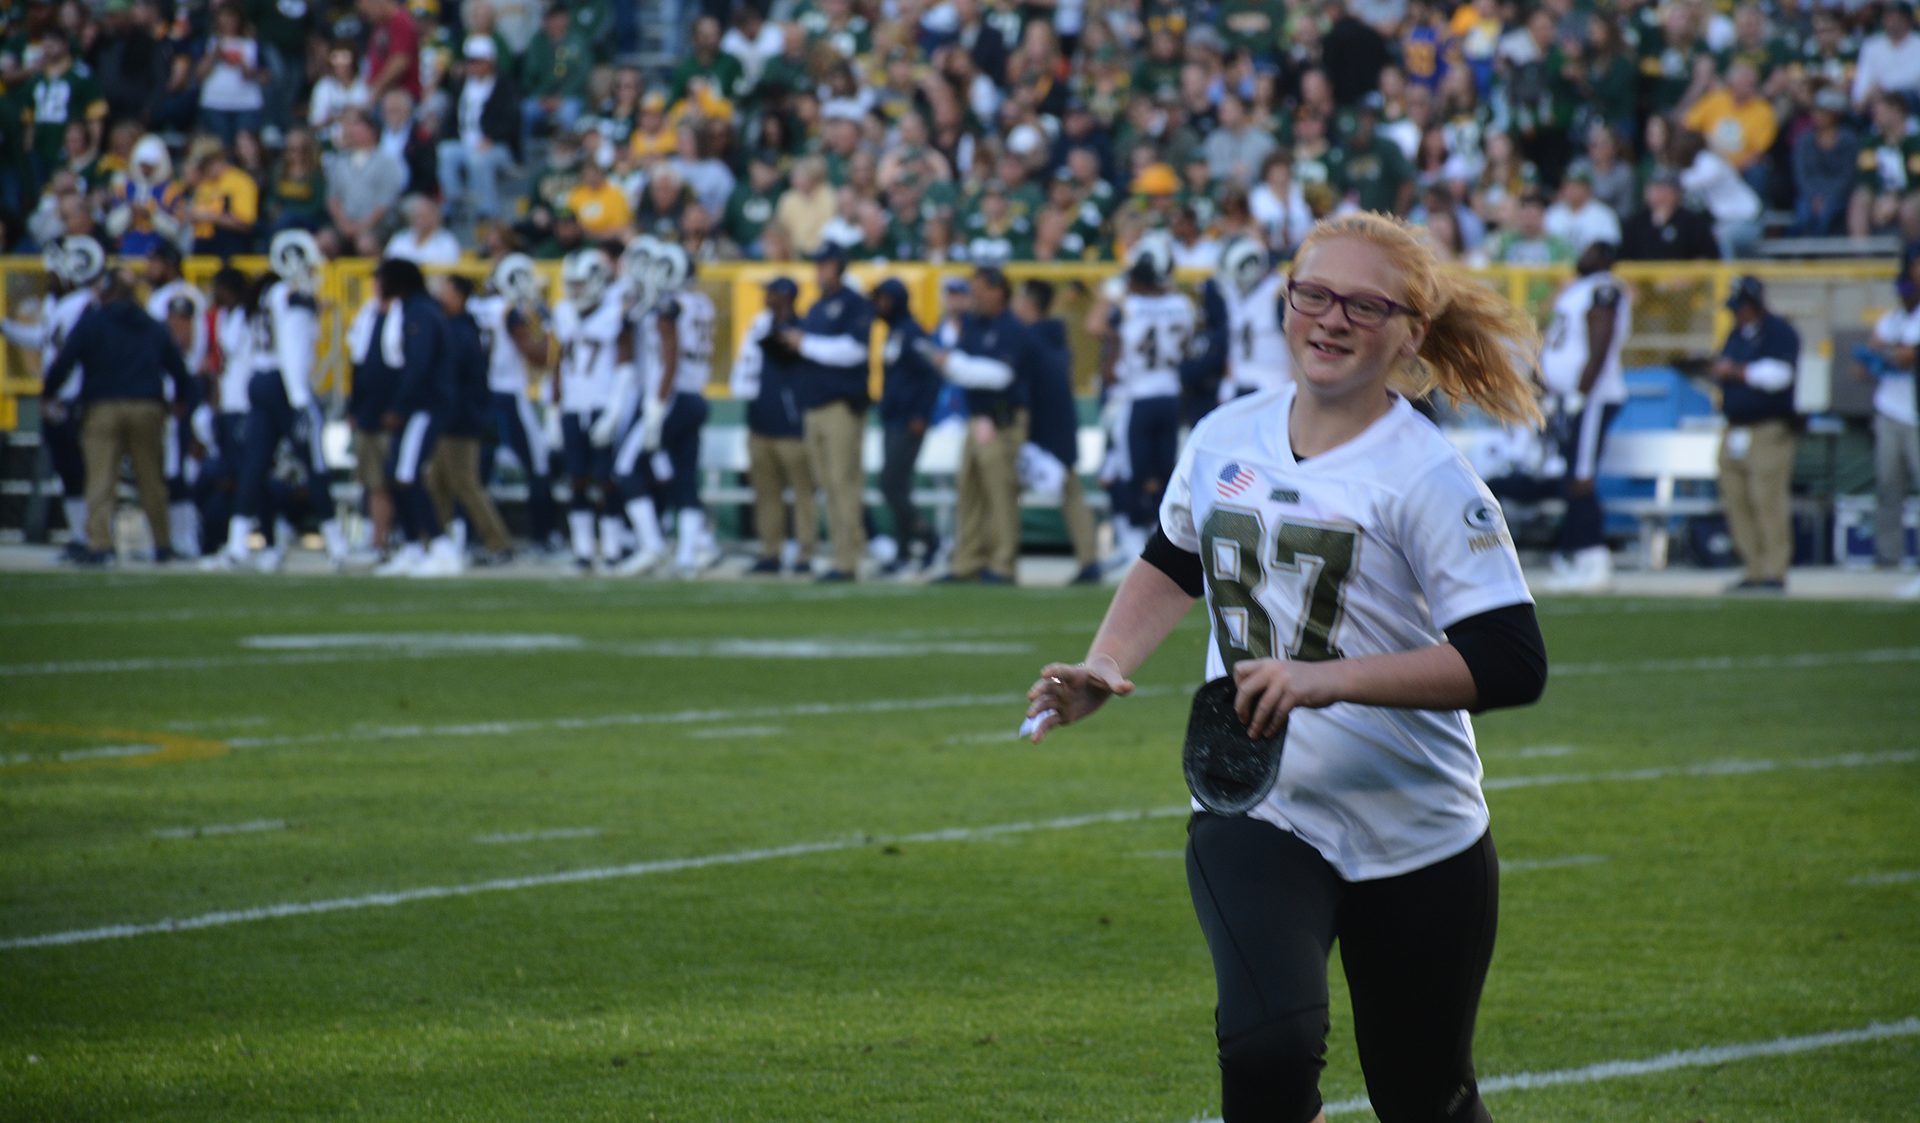 HSSD’s Hannah DeMille was Kickoff Kid for Packers-Rams game